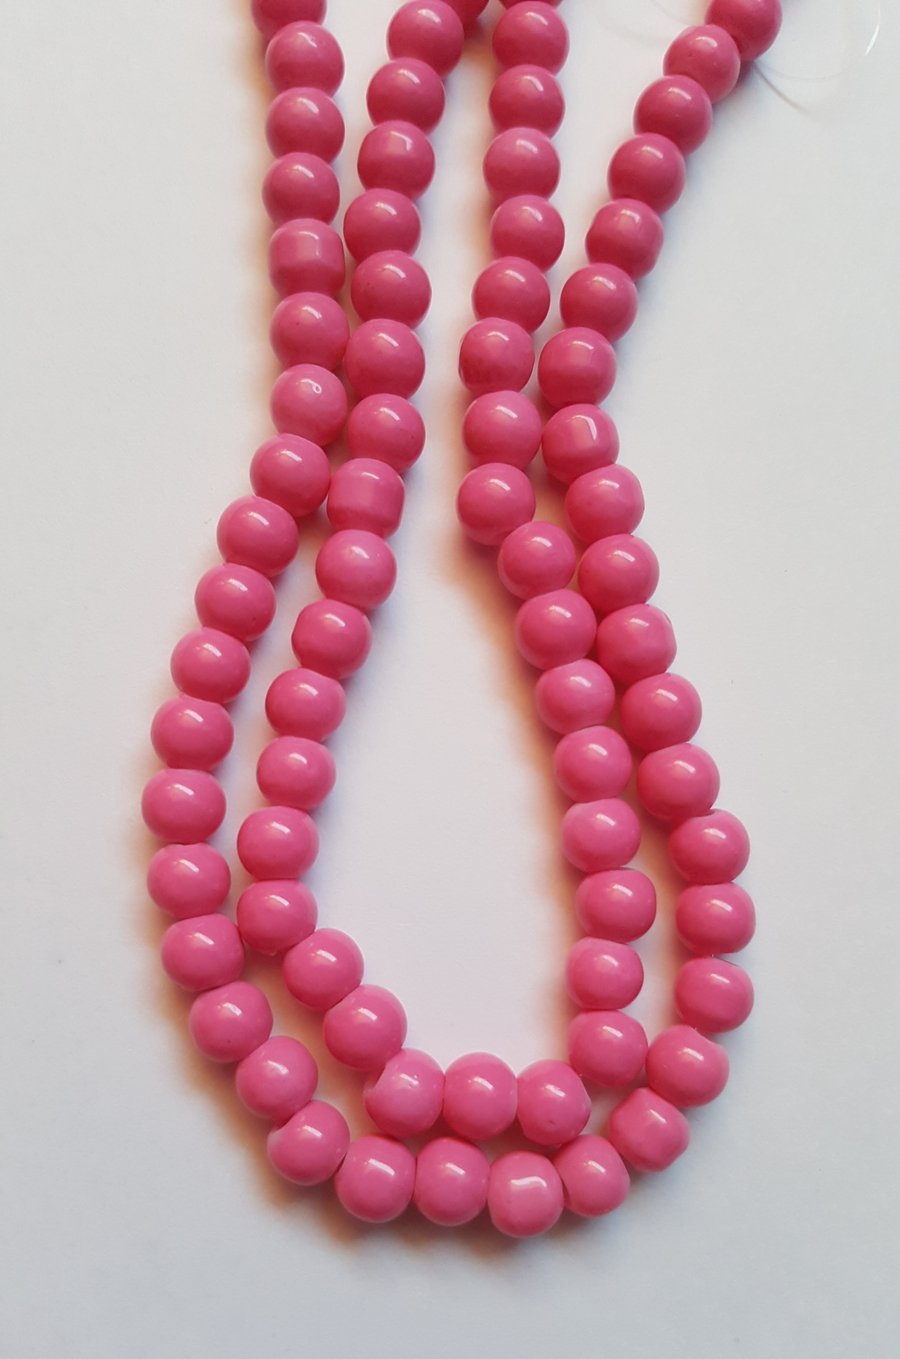 50 x Baked Glass Beads - Round - 6mm - Pink 